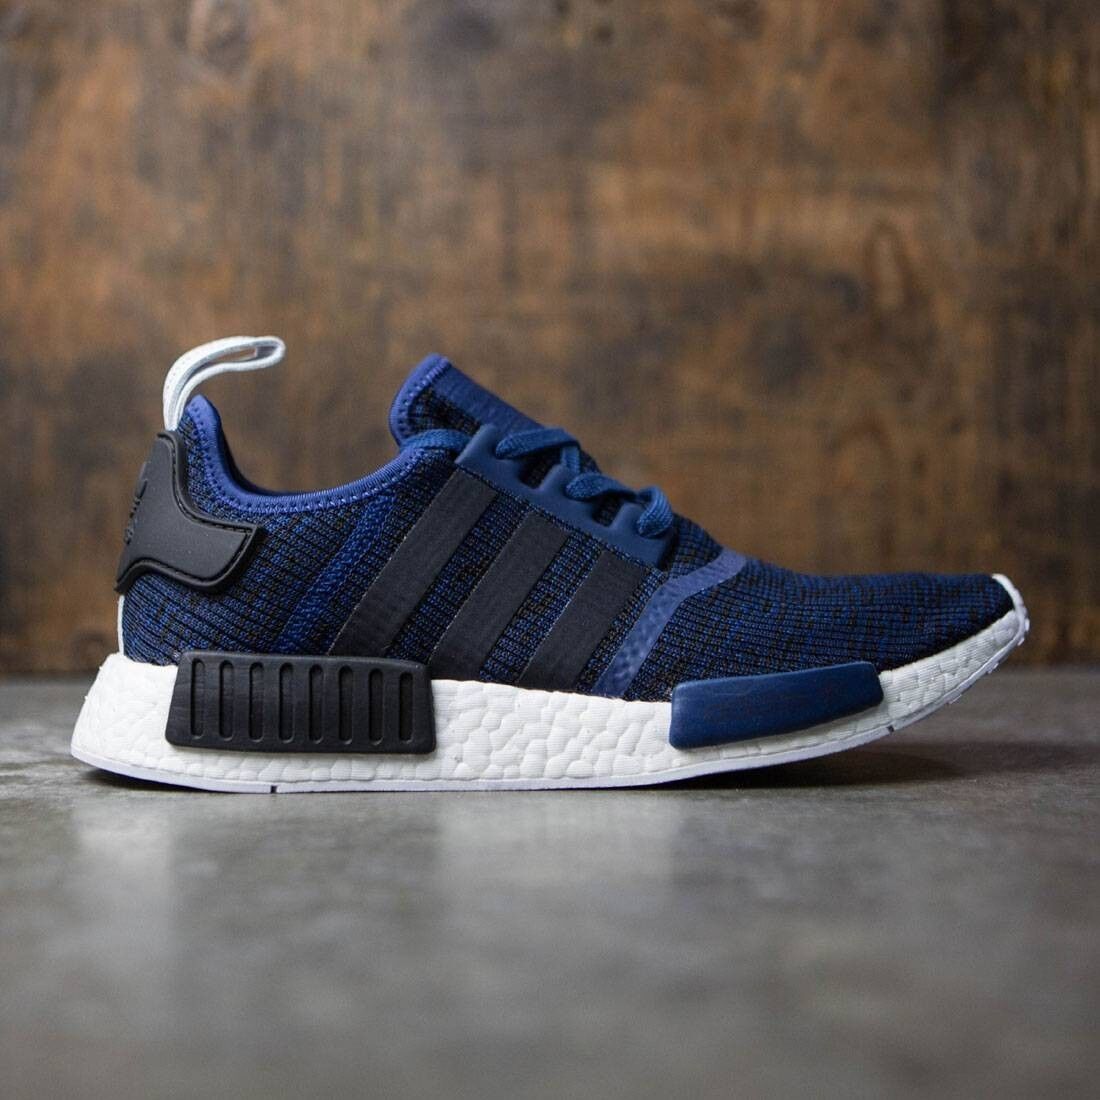 Star tomorrow wipe out Adidas NMD R1 Mystery Blue Nomad Collegiate Navy New Men Size 7.5-13 (BY2775)  | eBay